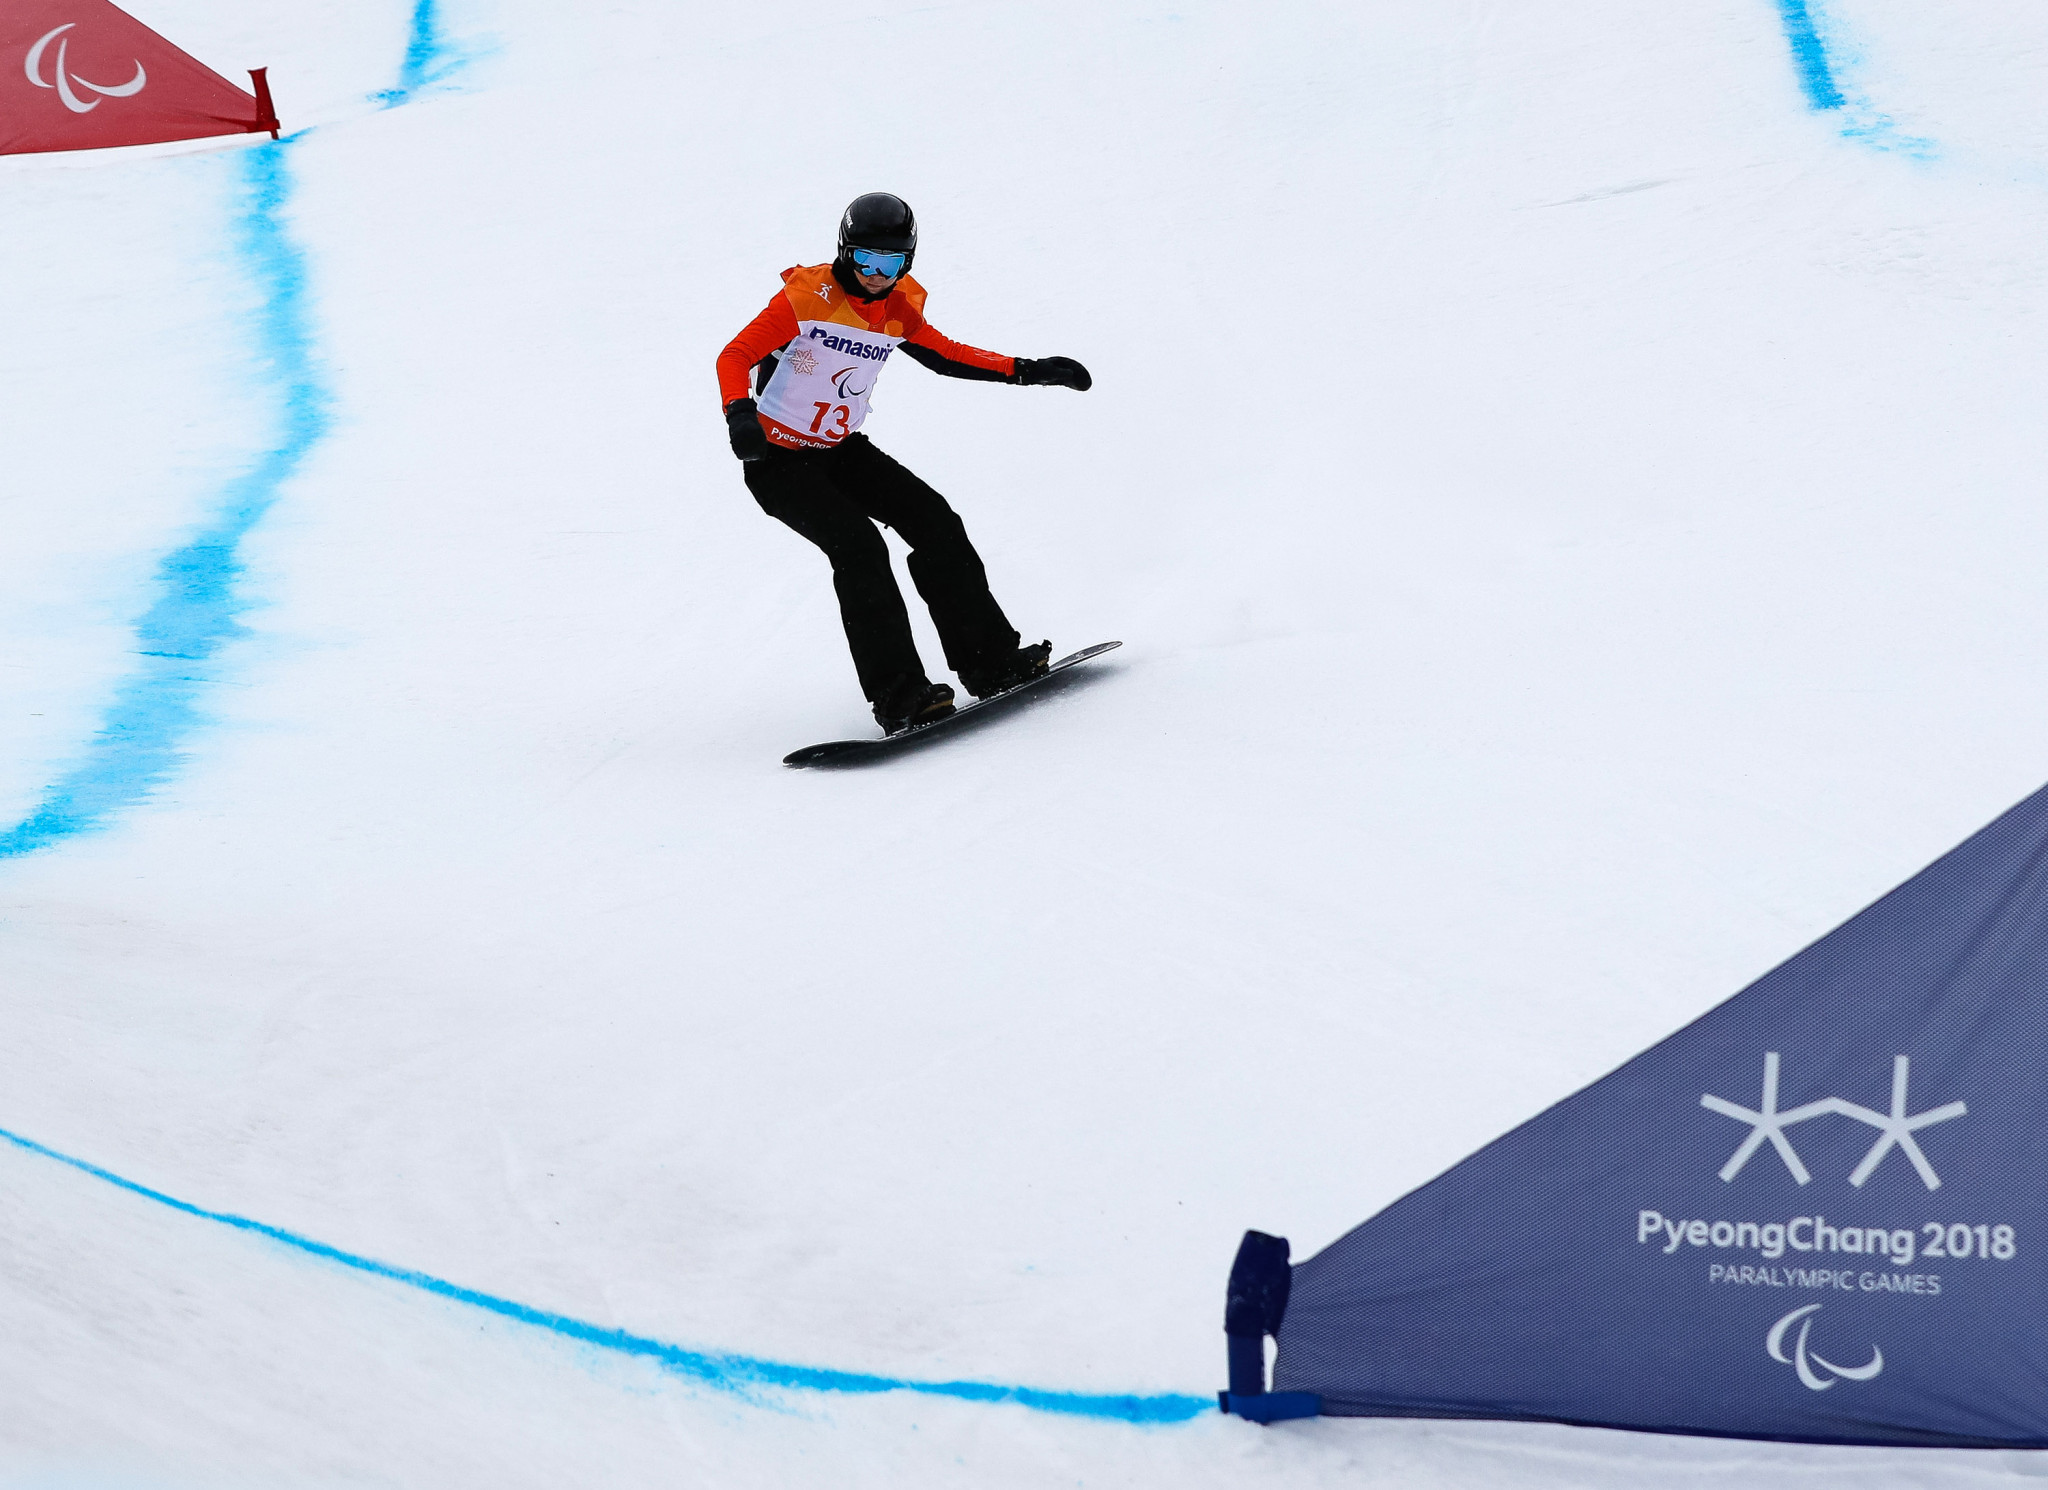 Dutch Para-snowboarder Lisa Bunschoten has been voted the IPC Allianz Athlete of the Month for March after securing her first major career titles ©Getty Images